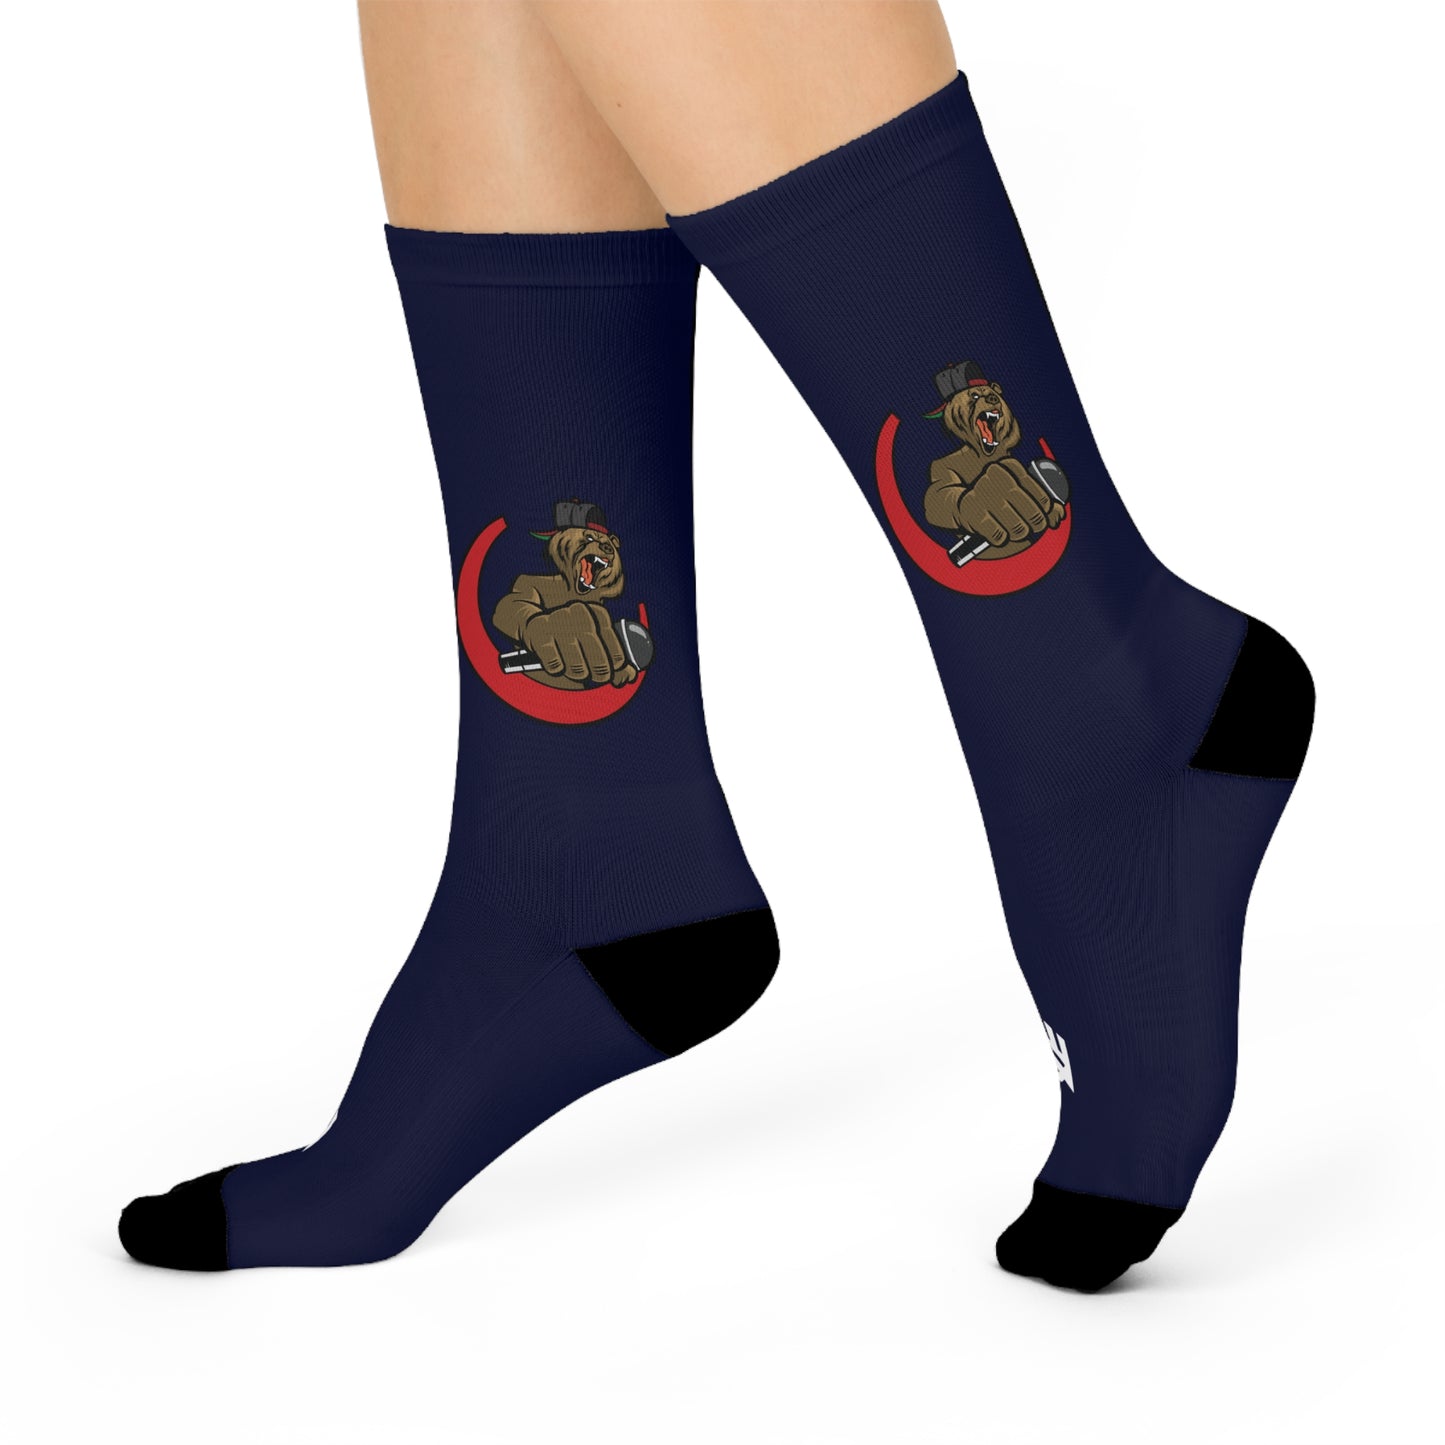 Lac Grizzy Signature DTG Crew Socks